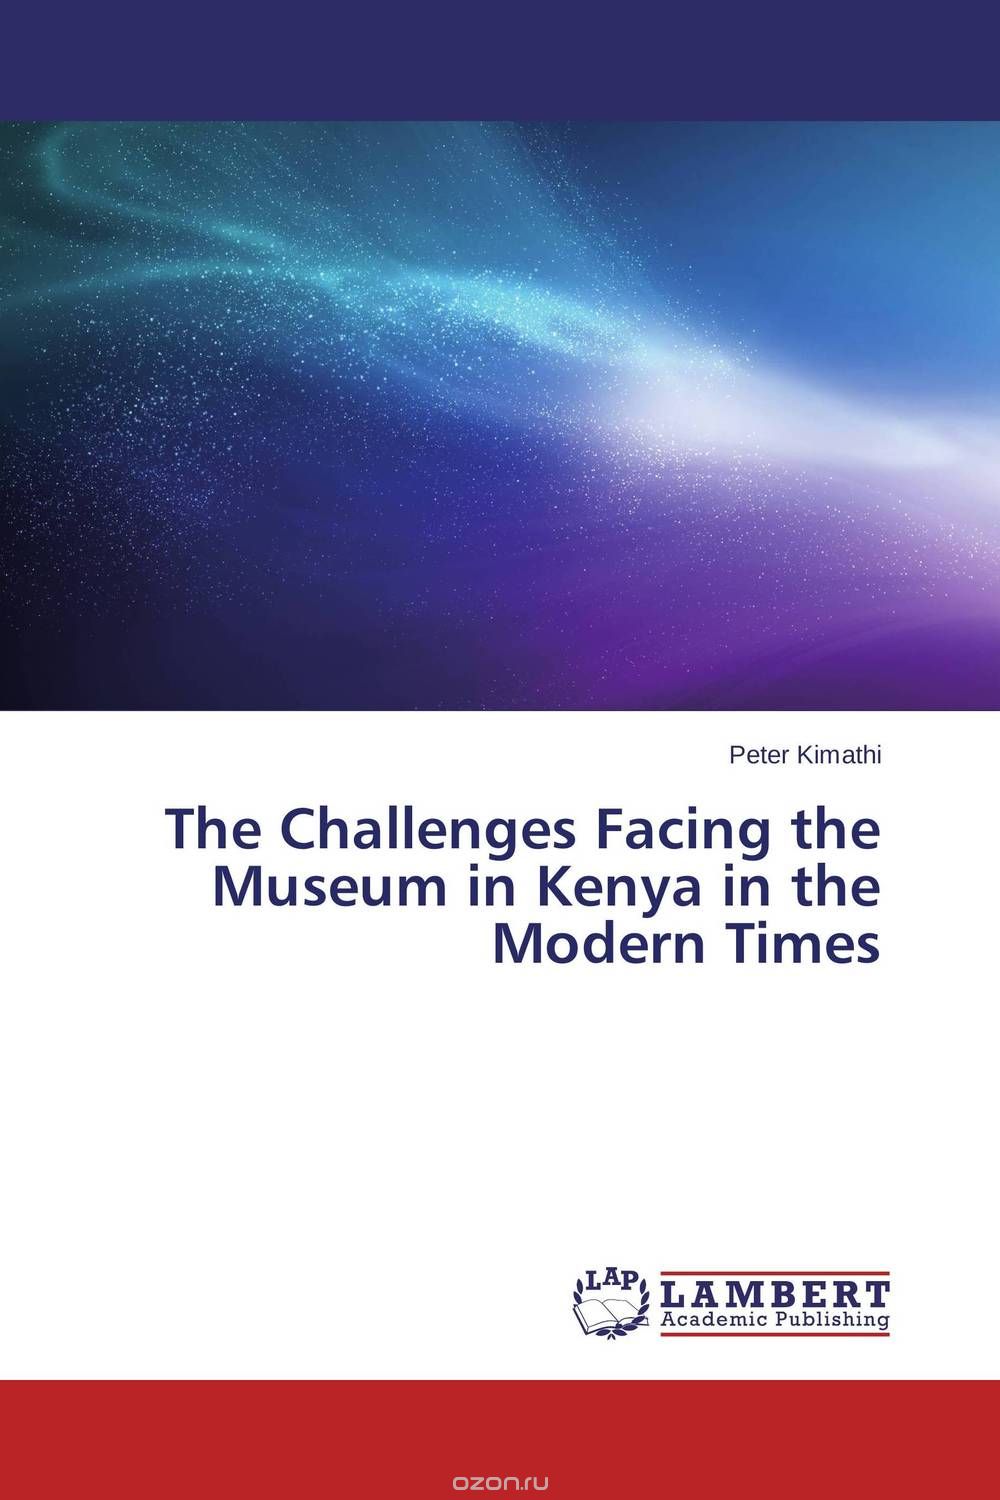 Скачать книгу "The Challenges Facing the Museum in Kenya in the Modern Times"